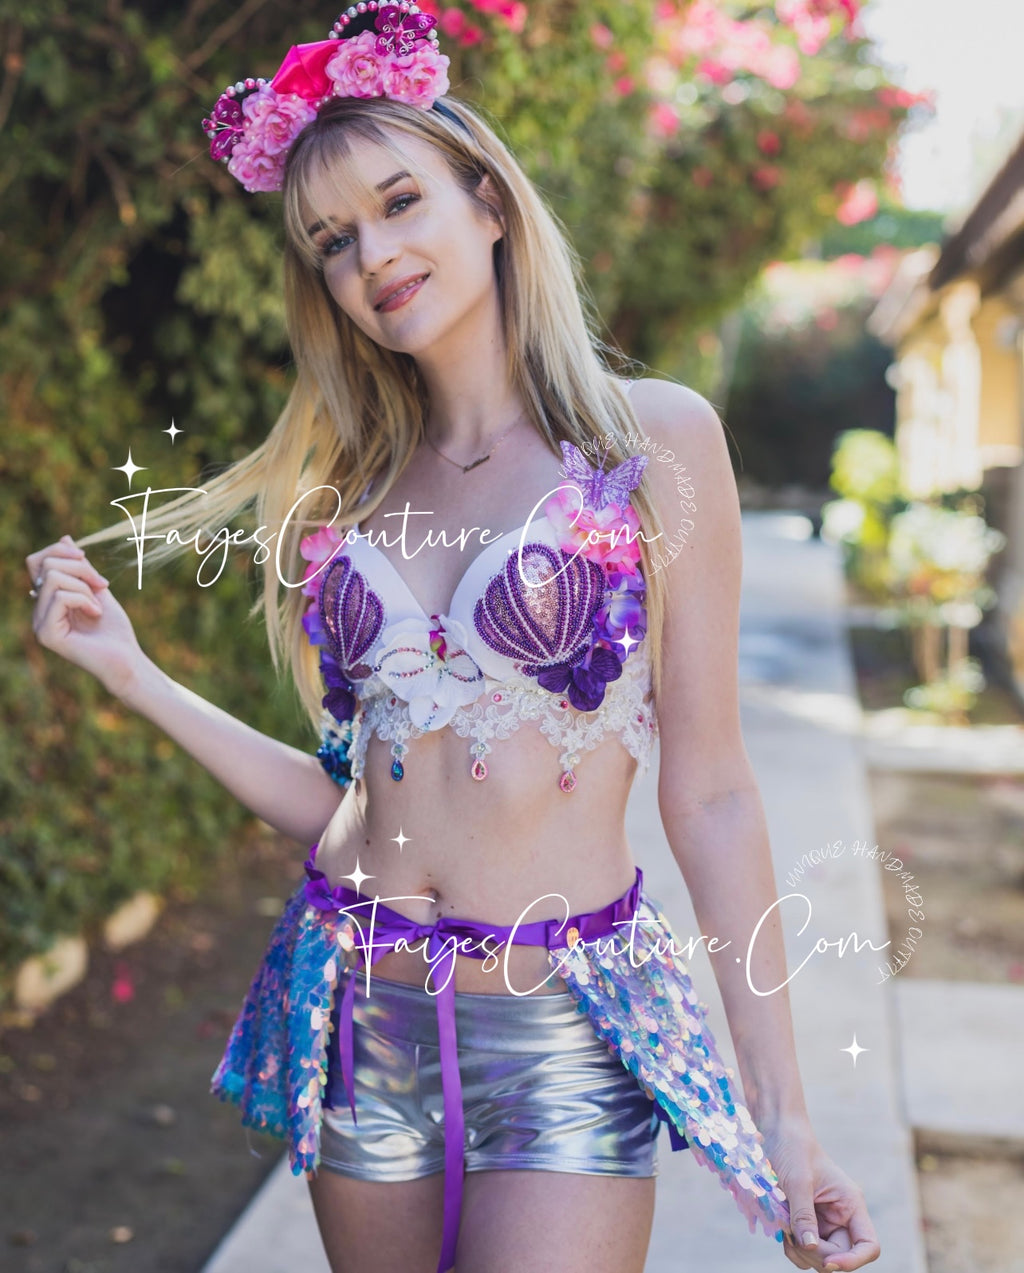 Club Exx Clear Holographic PVC Bra Top - Blue/Purple  Rave outfits,  Festival outfits rave, Edm festival outfit